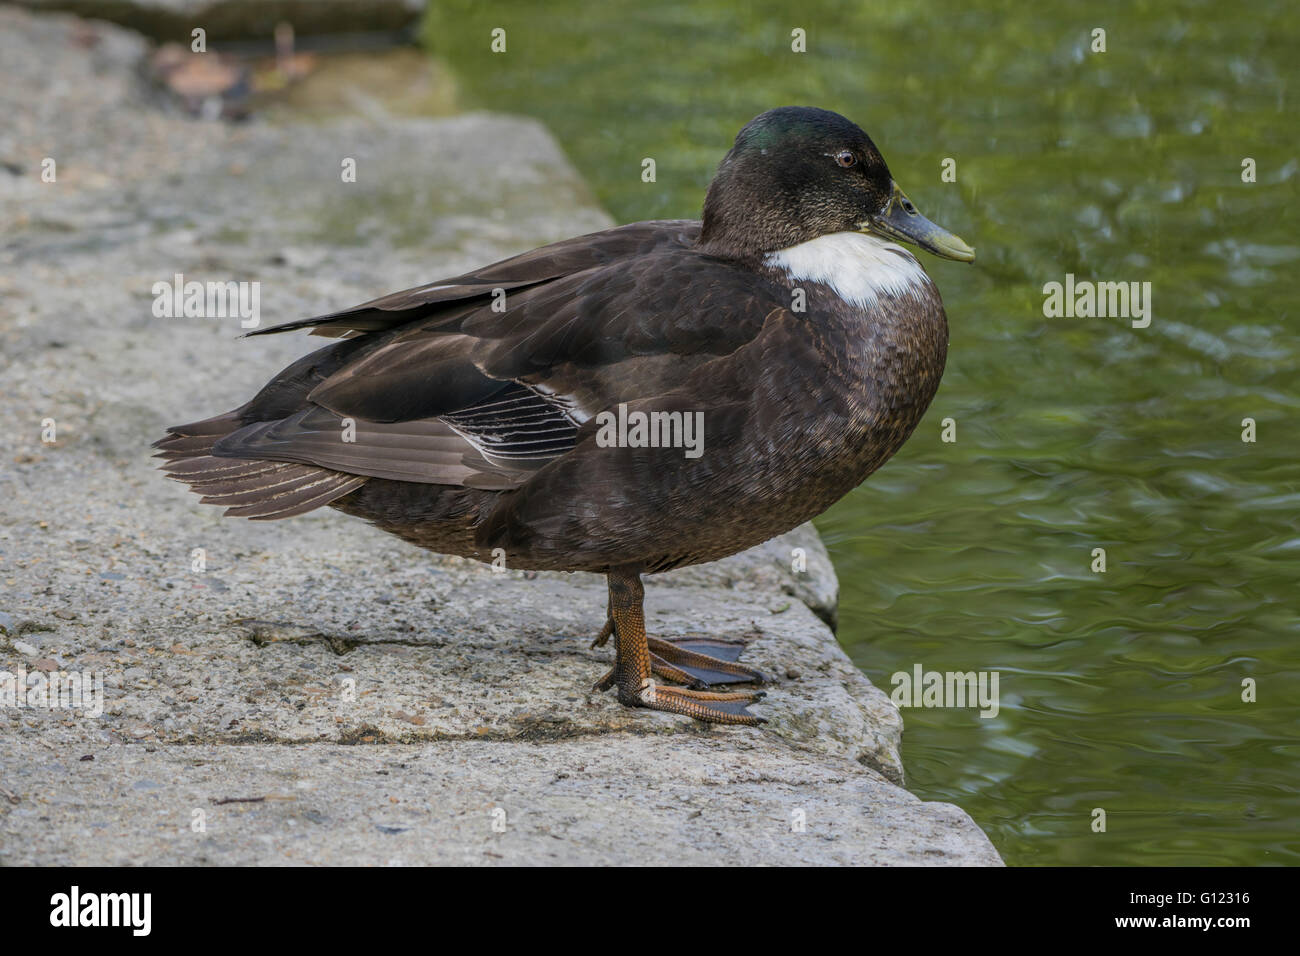 Manky Mallard duck standing at the edge of a pond Stock Photo